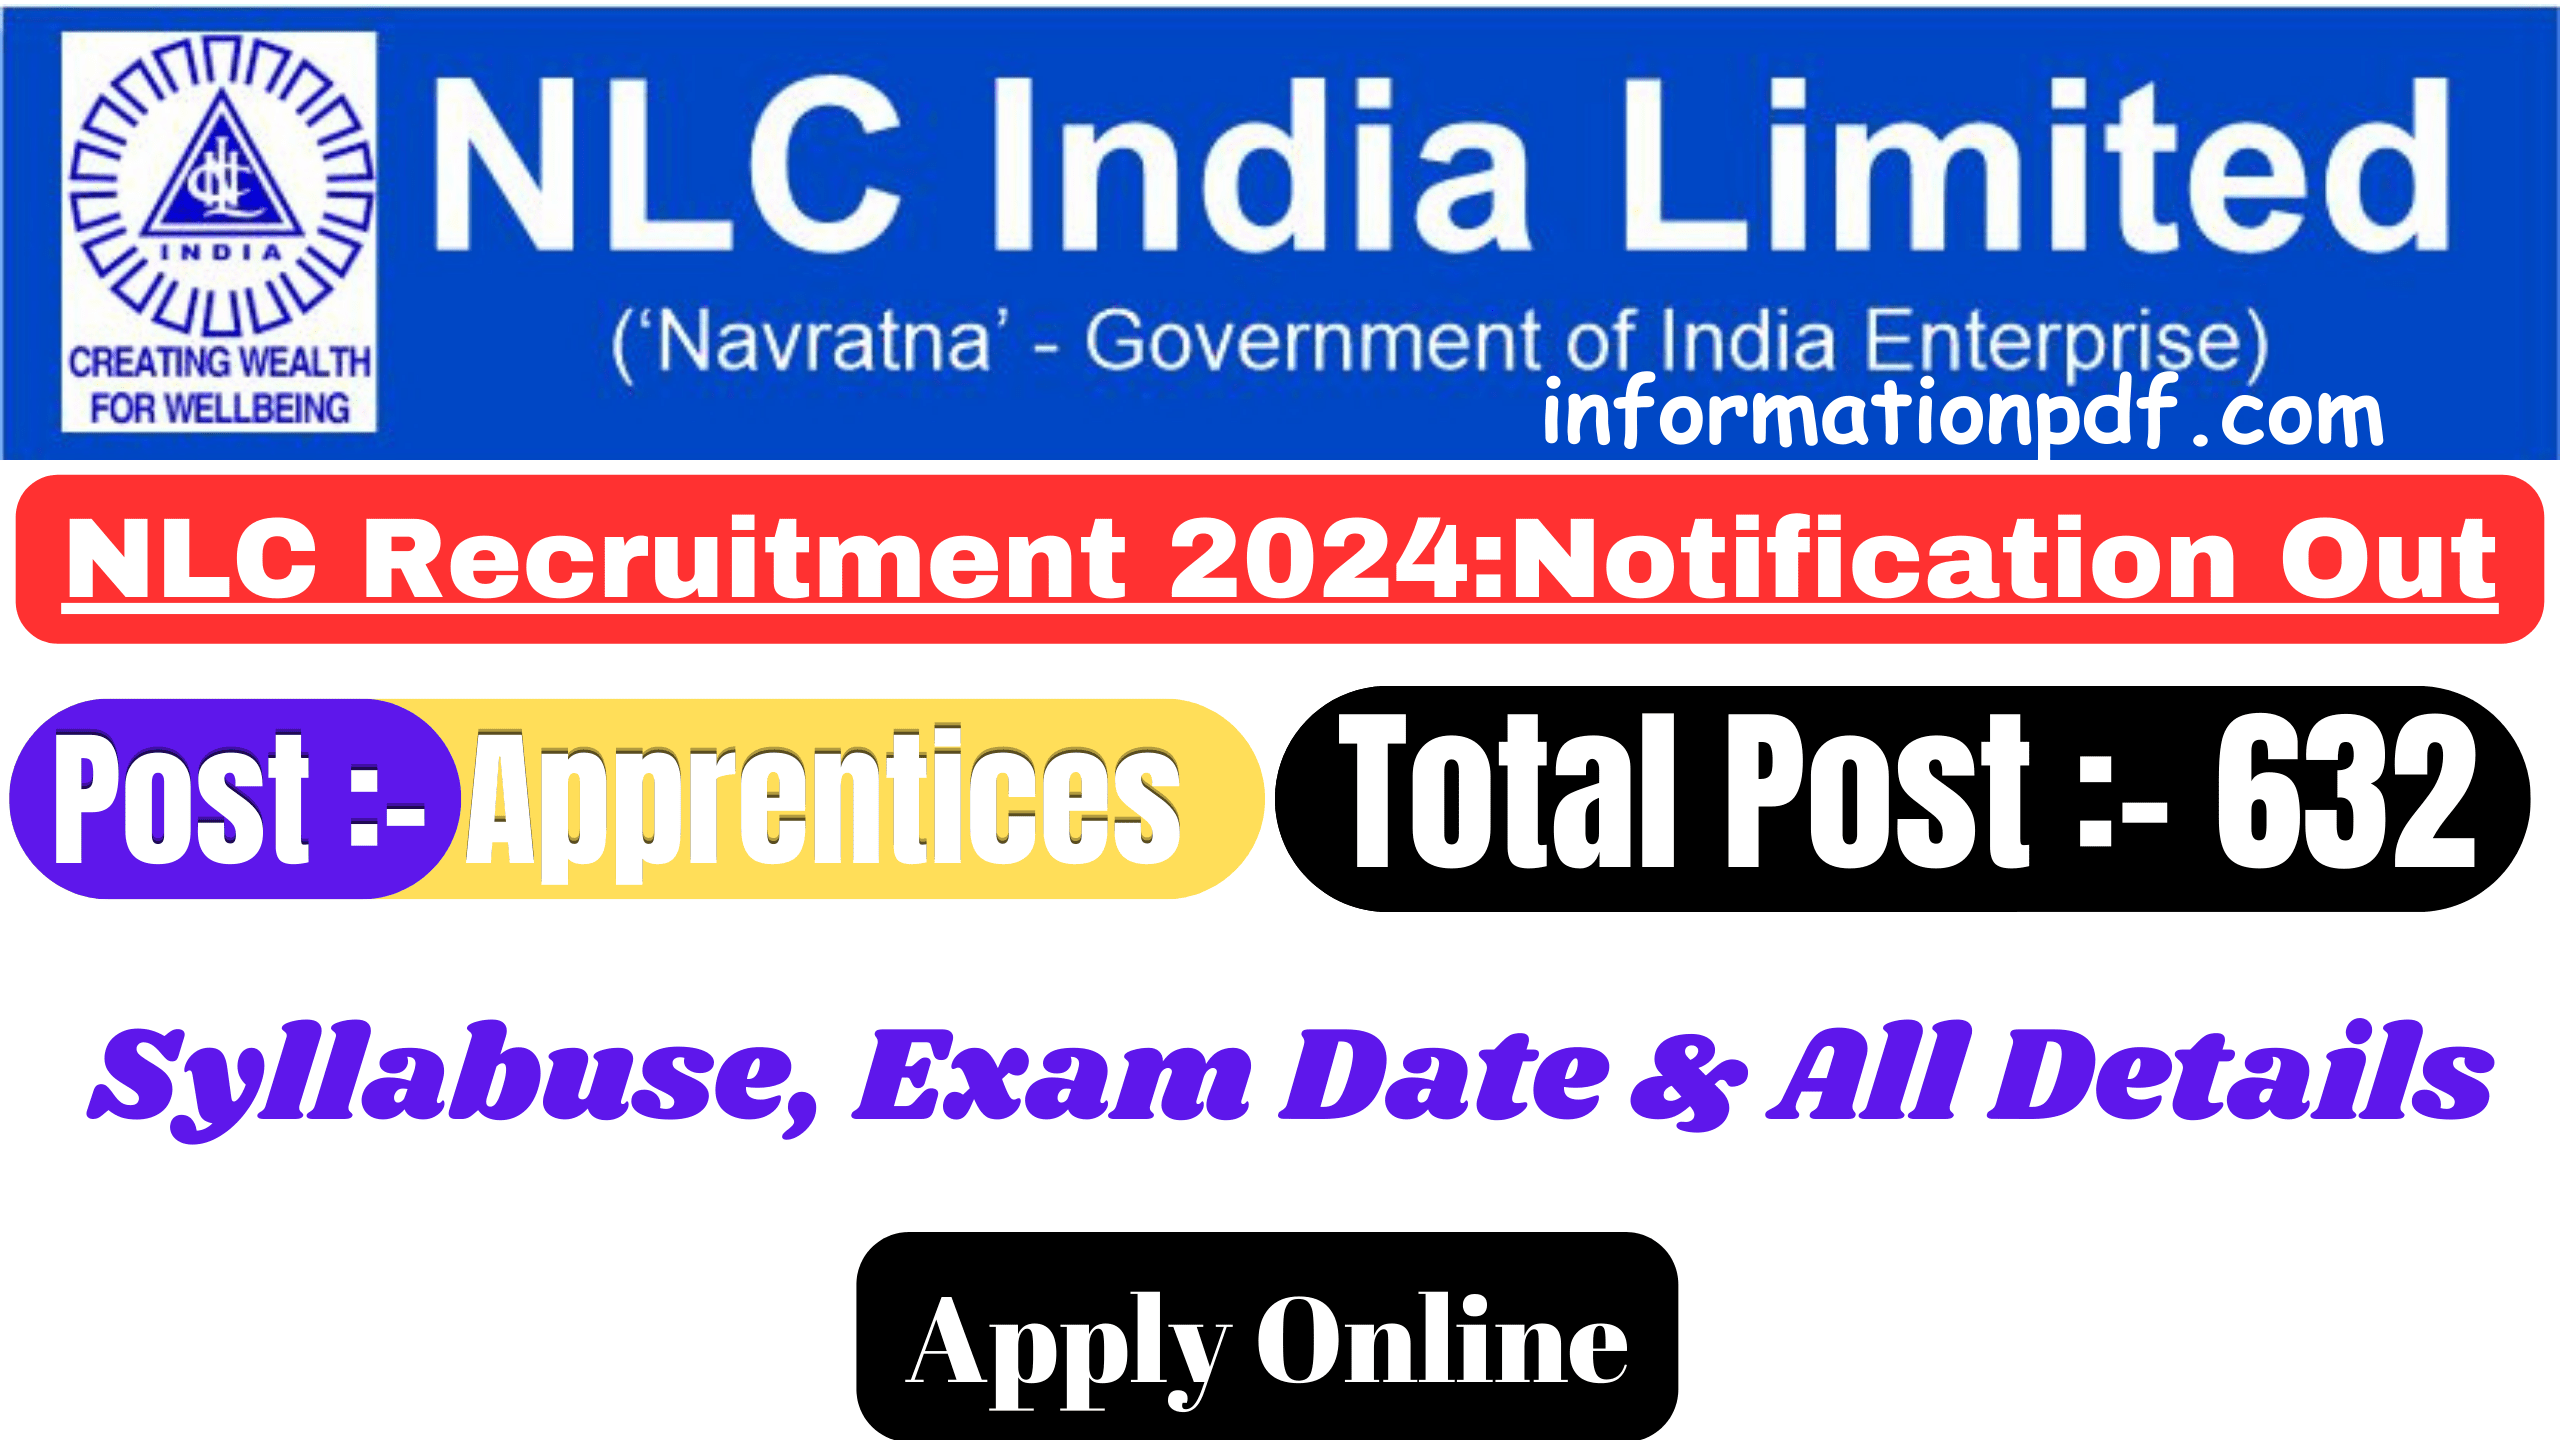 Oil India Recruitment 2024 Notification OUT 4